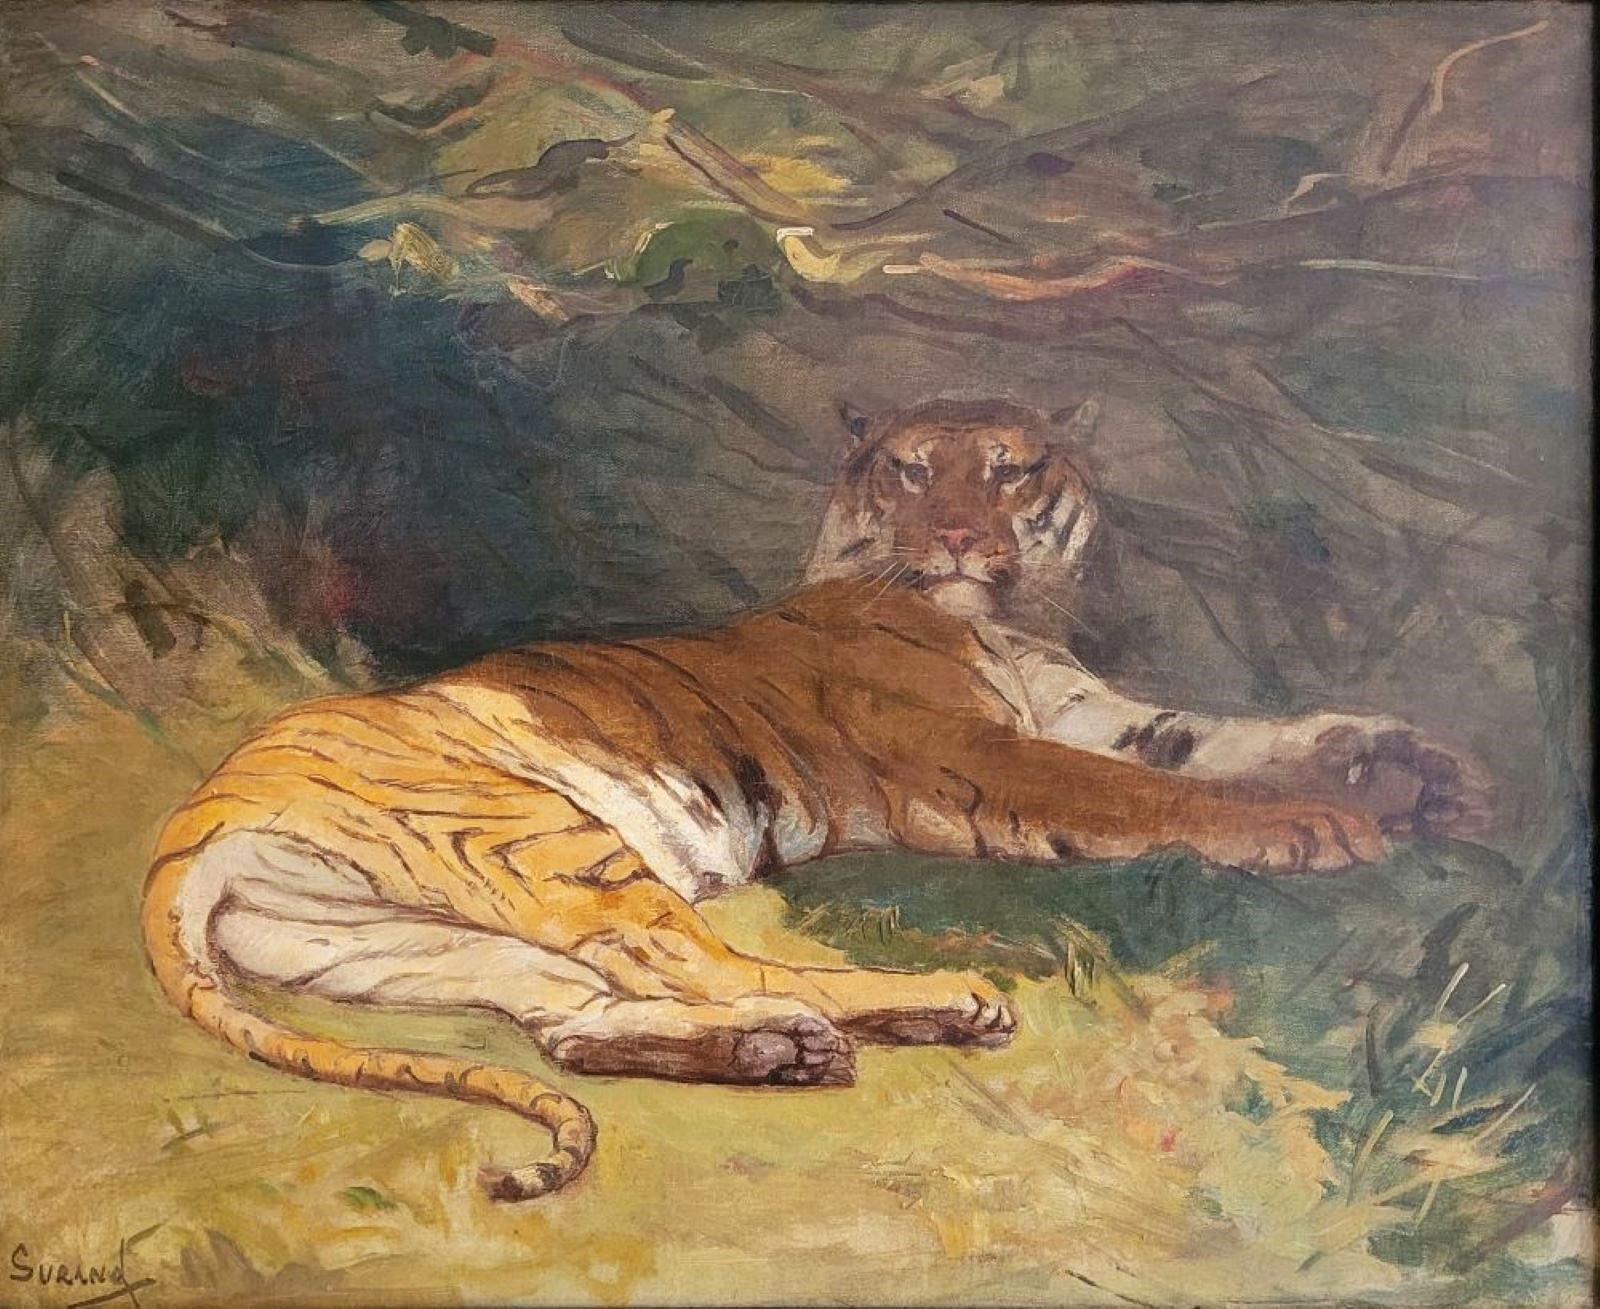 Le tigre de Cochinchine - Painting by Gustave Surand